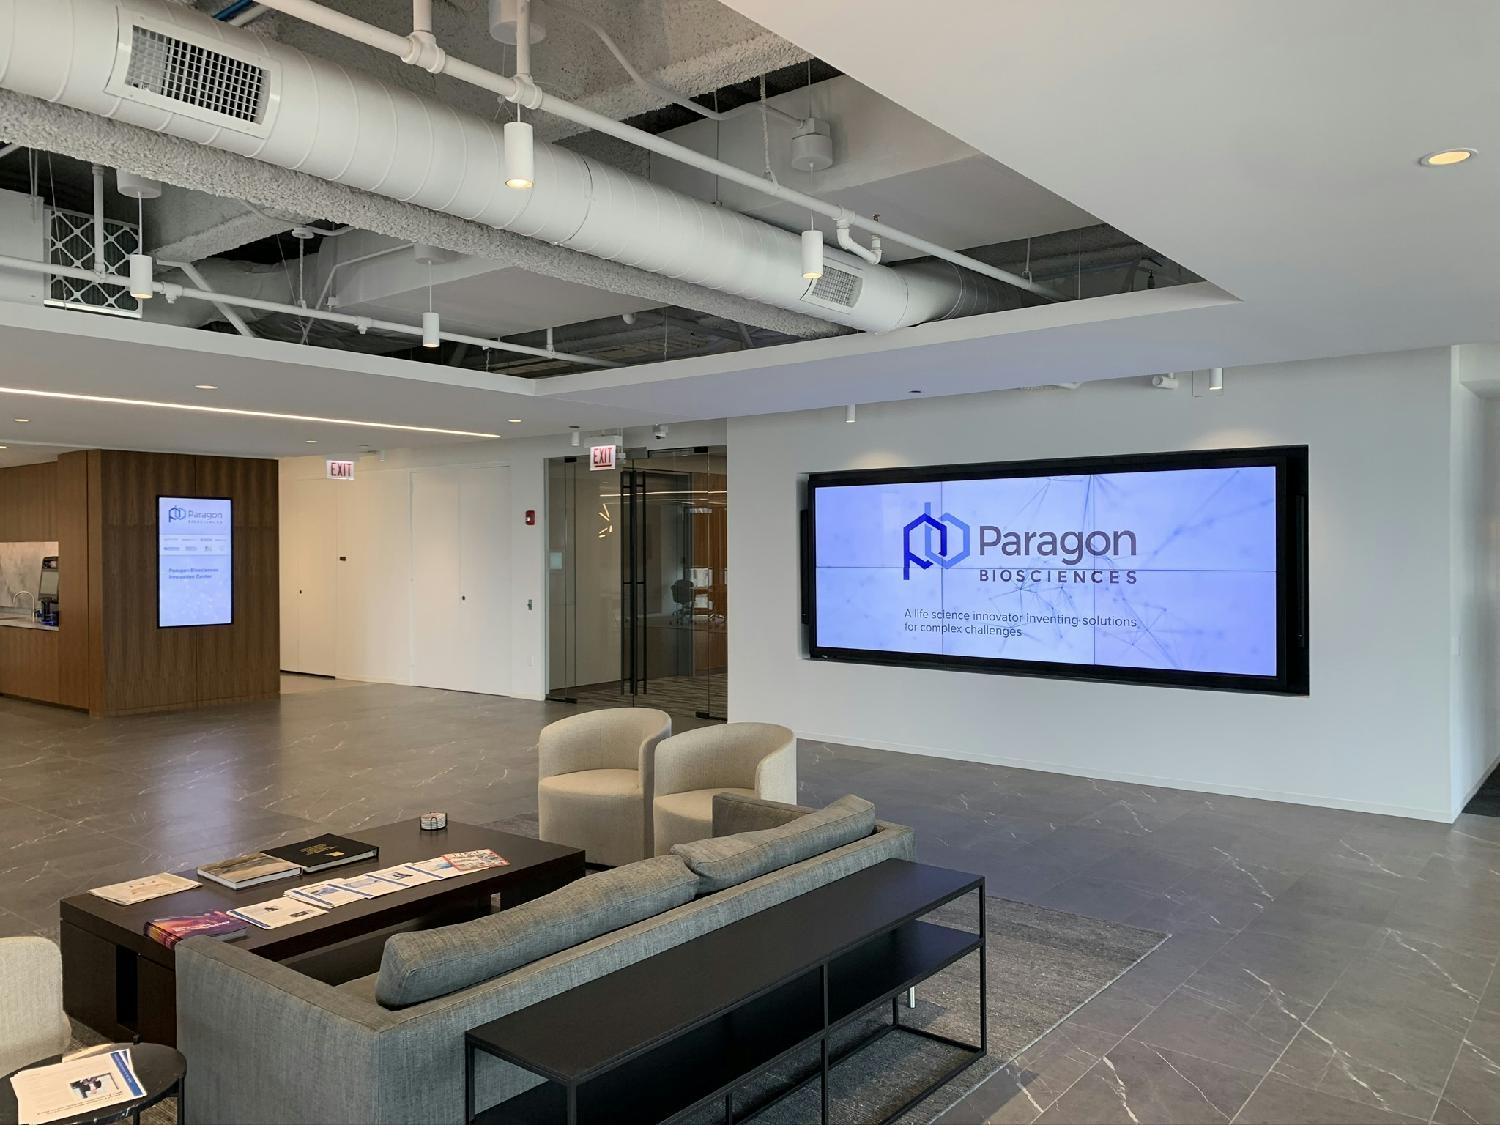 Visitors are greeted in our reception area that features an informational video about Paragon.